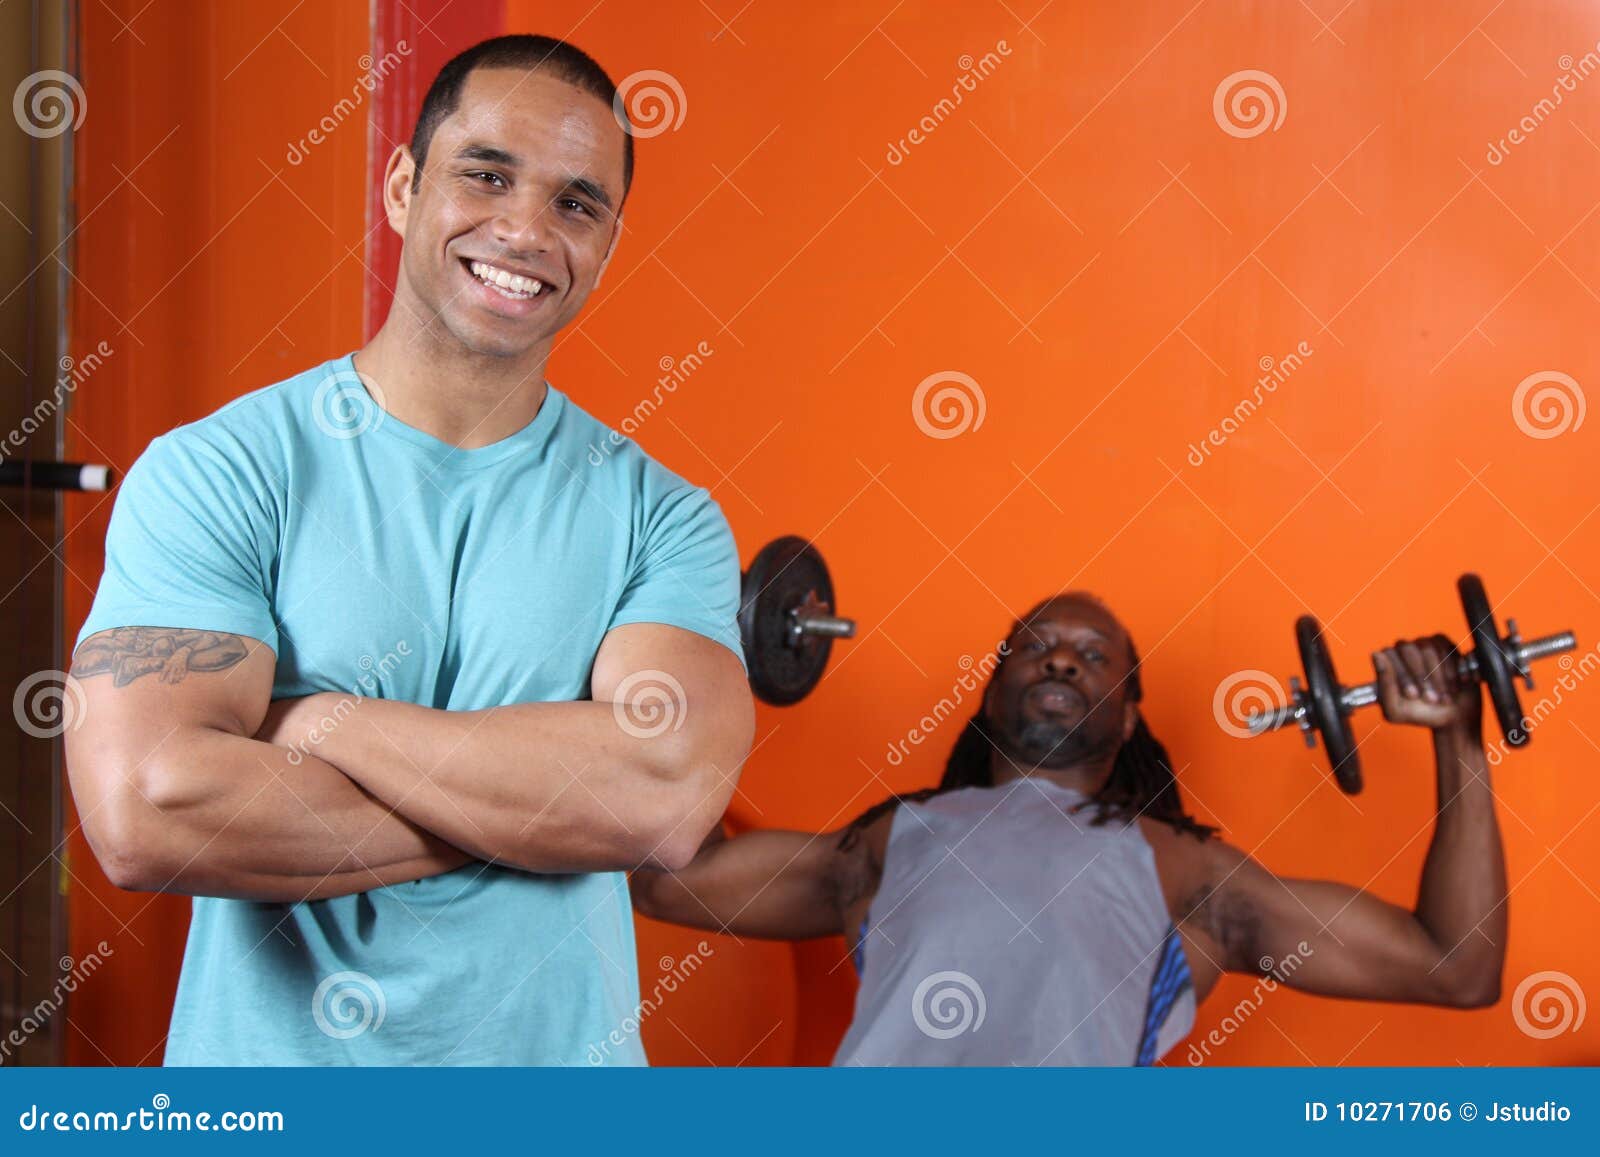 personal trainer and trainee